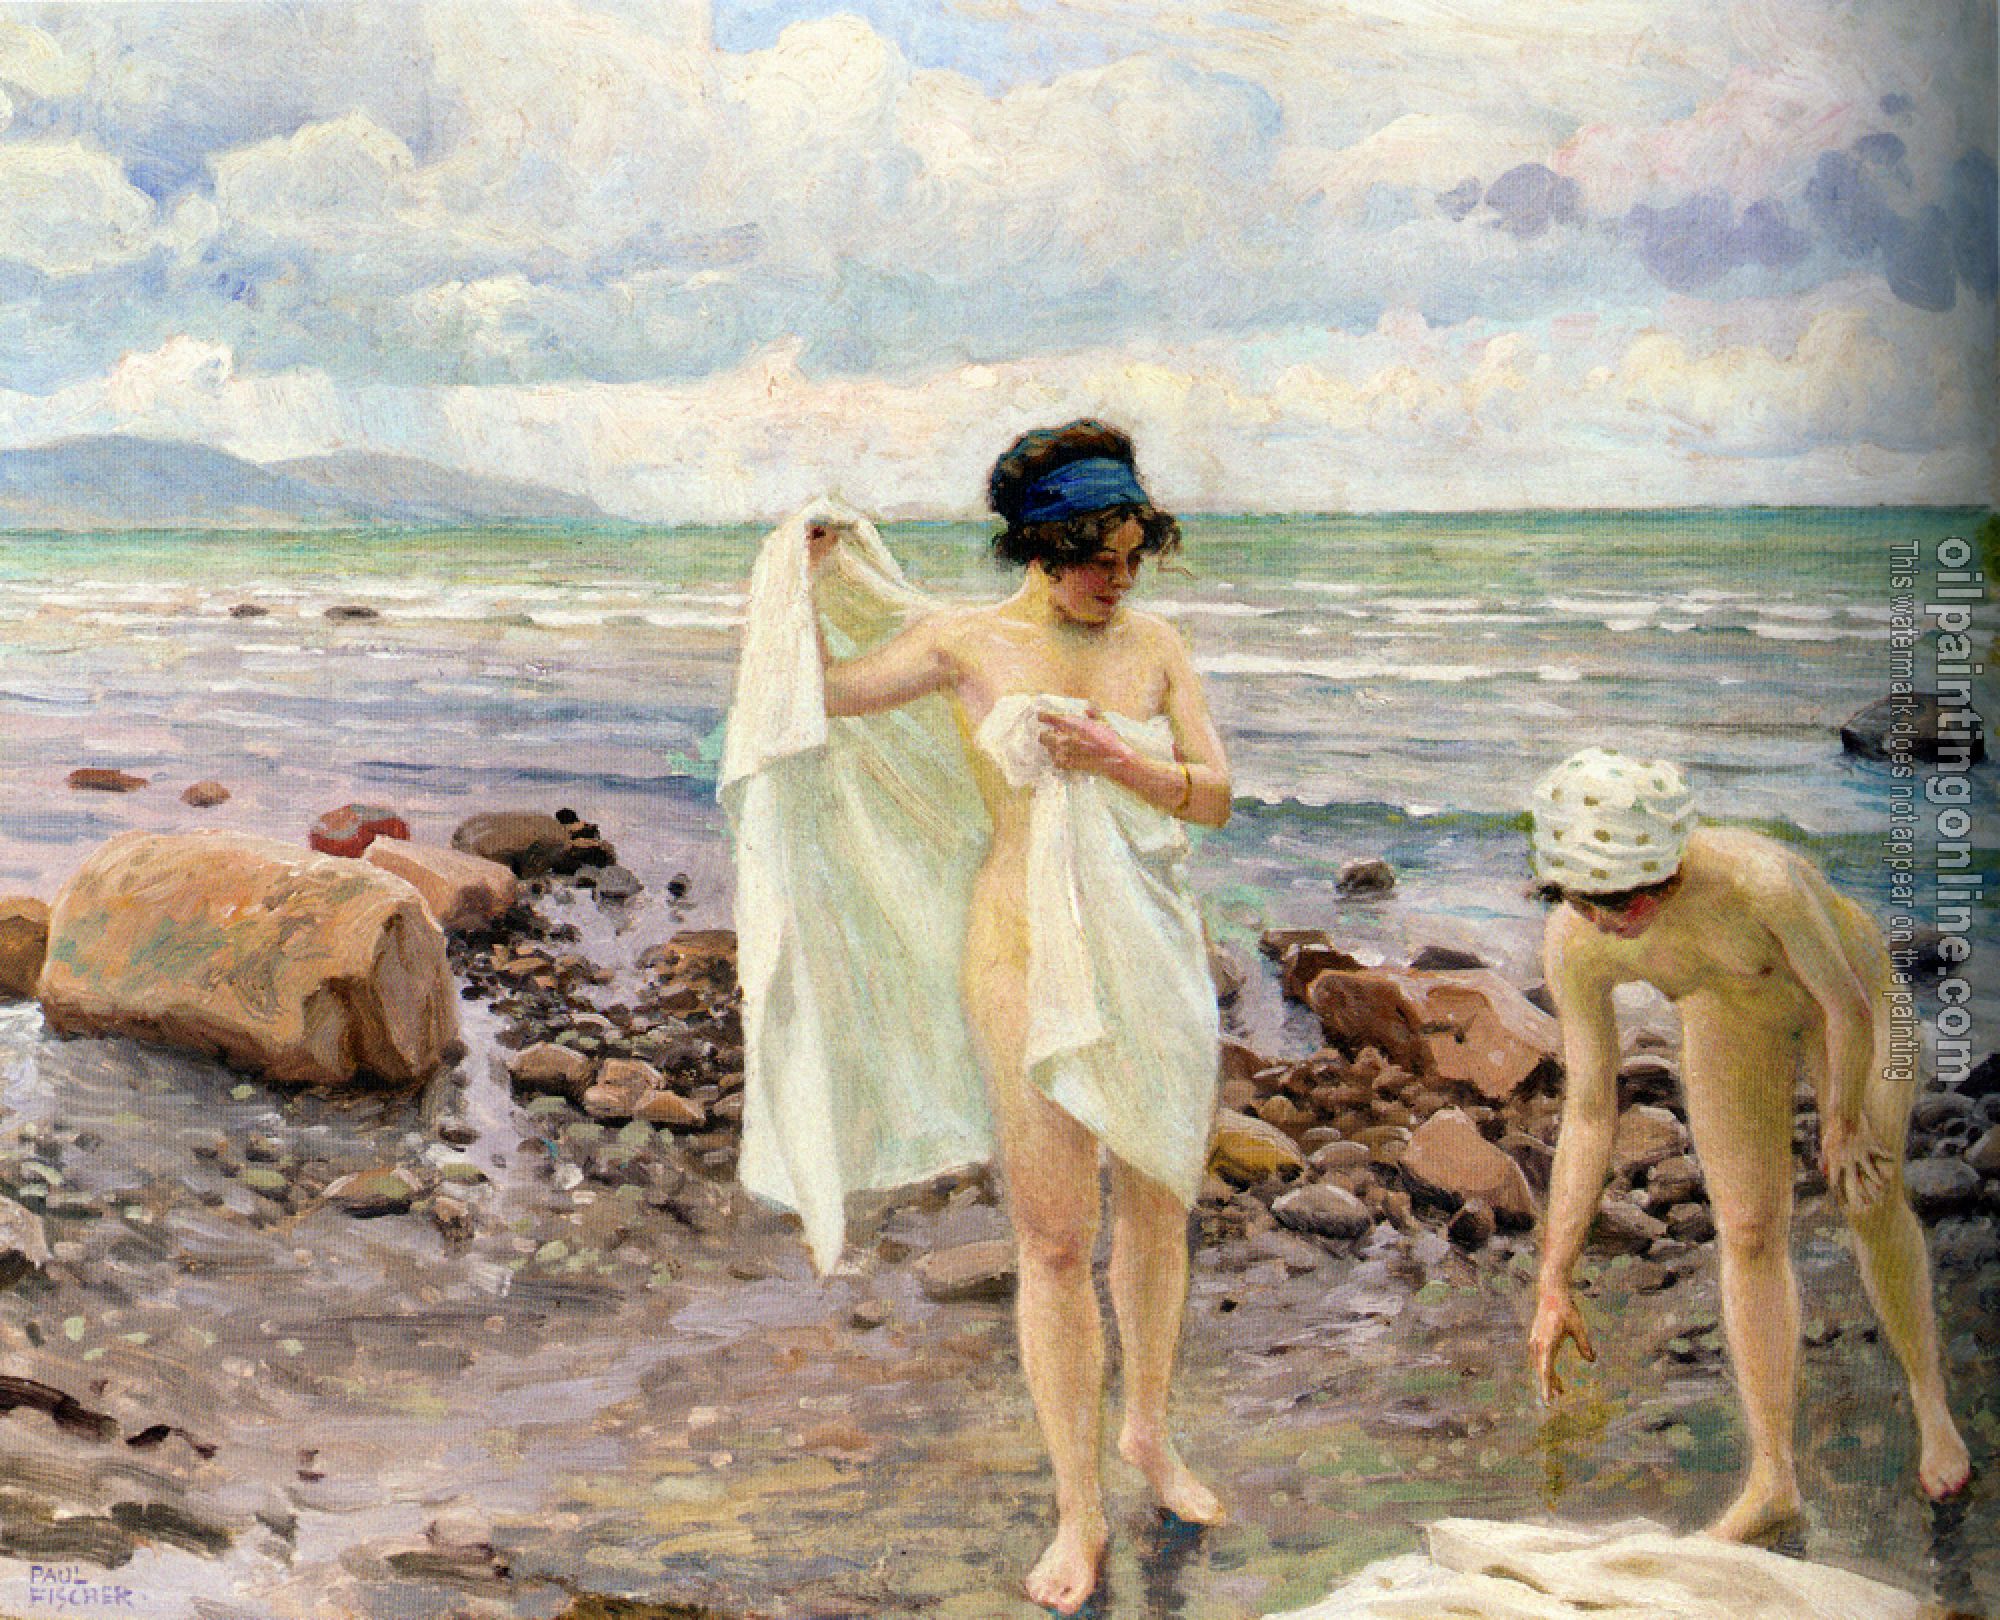 Paul Gustave Fischer - The Bathers